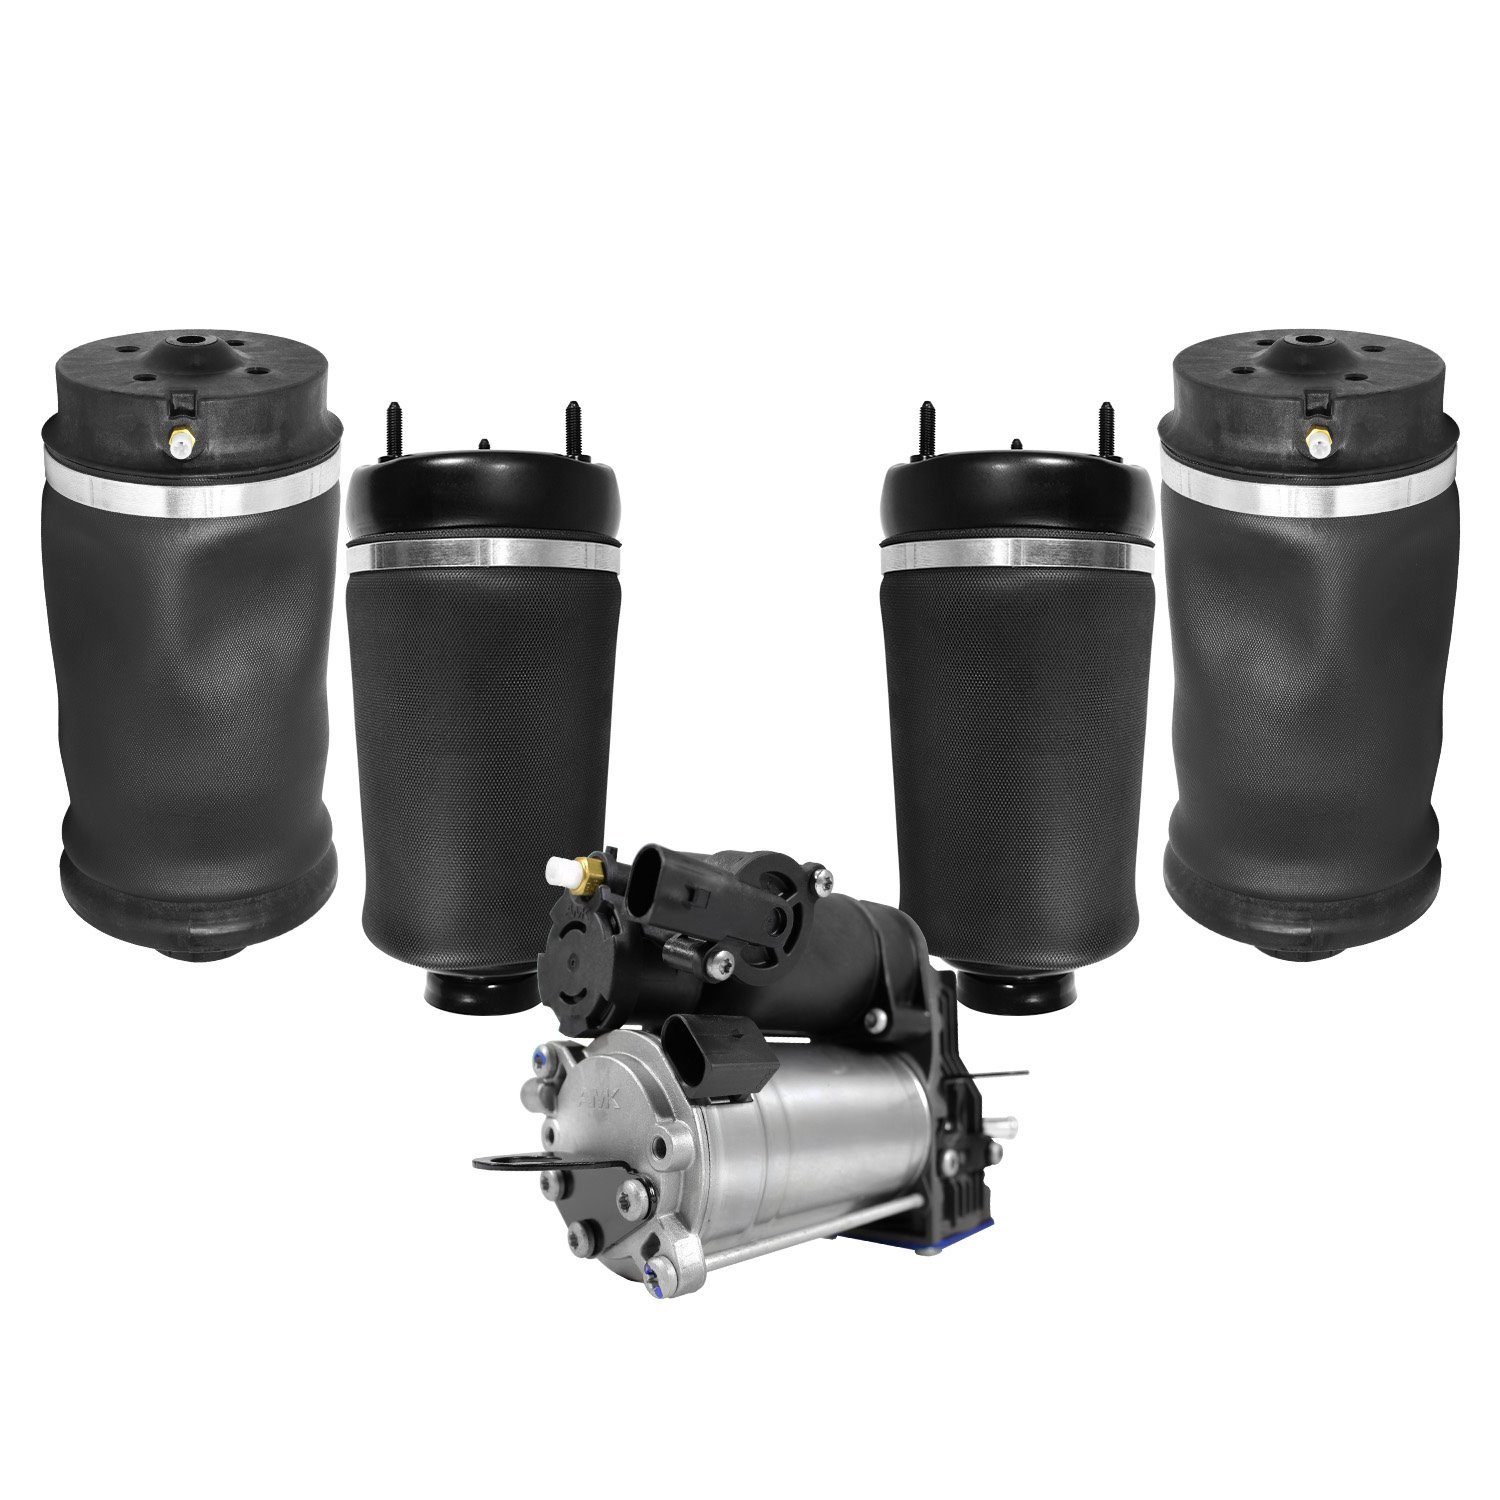 4-15-112900-C Front & Rear Suspension Air Spring Kit, Includes Air Suspension Compressor Fits Select Mercedes-Benz